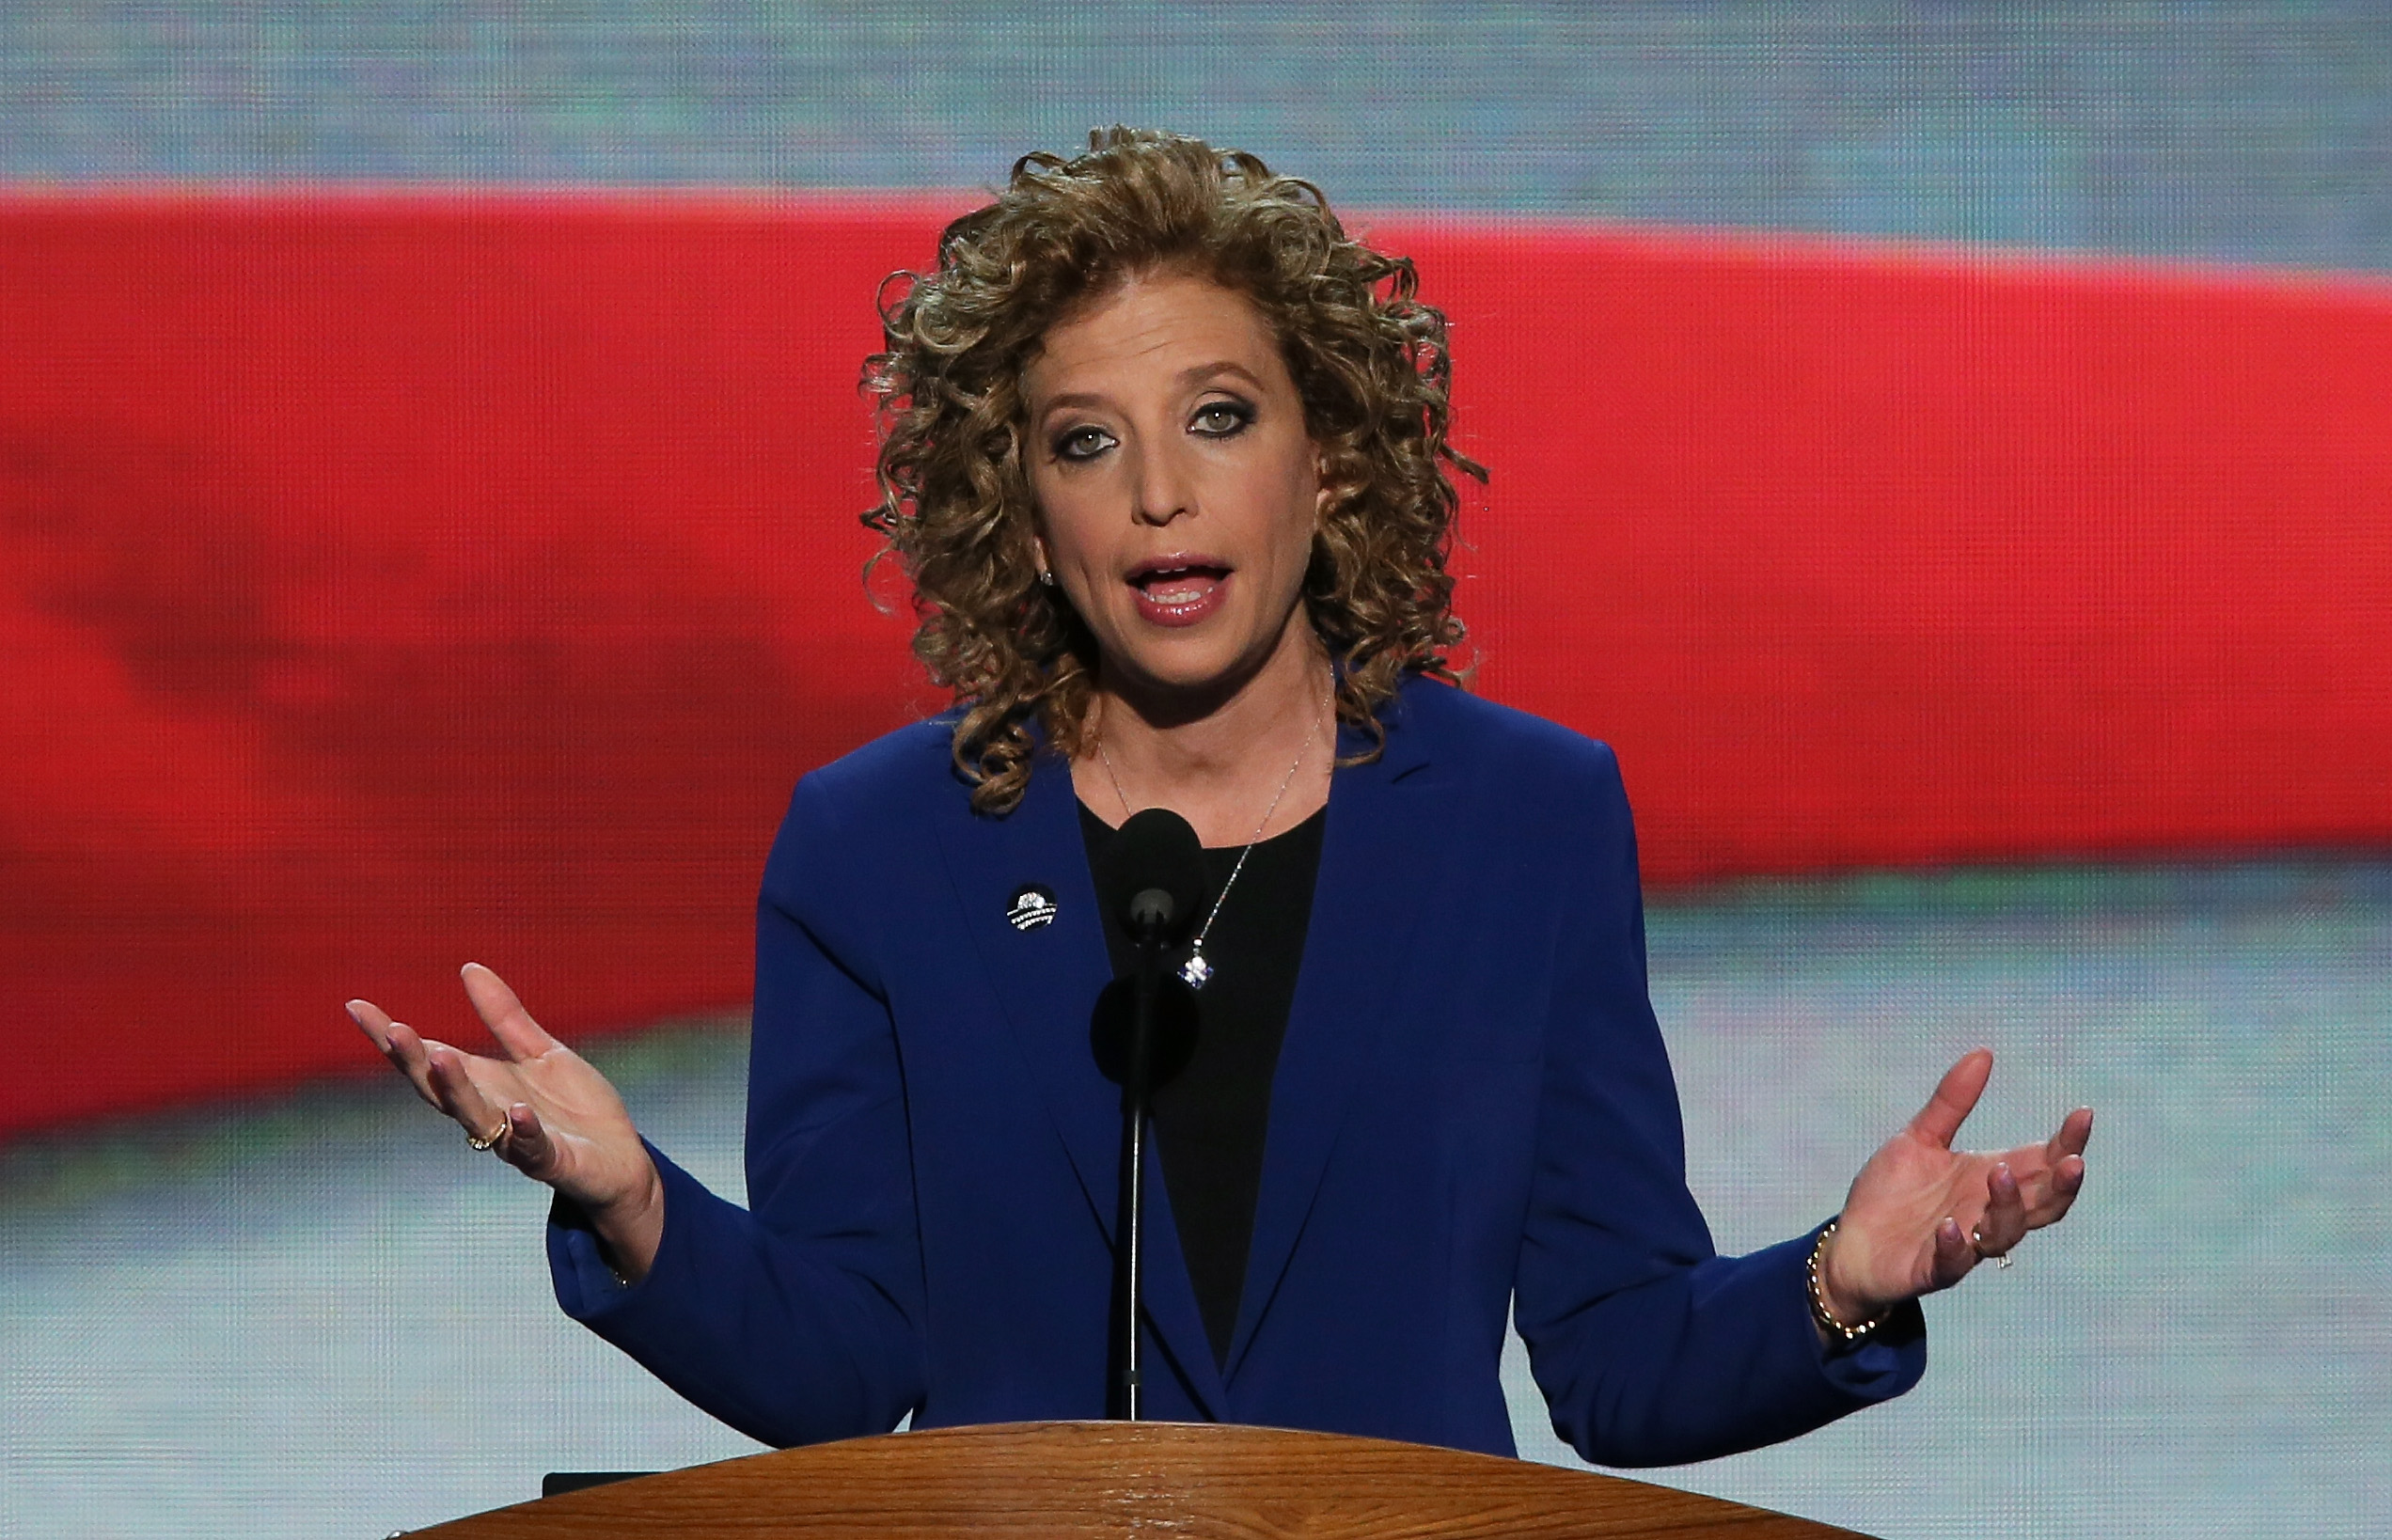 (FILES) This file photo taken on September 05, 2012 shows Democratic National Committee Chair Debbie Wasserman Schultz speaking on stage during the final day of the Democratic National Convention at Time Warner Cable Arena in Charlotte, North Carolina.  Embattled Democratic Party chair Debbie Wasserman Schultz said Sunday, July 24, 2016 she is resigning, following a leak of emails suggesting an insider attempt to hobble the campaign of Hillary Clinton's rival in the White House primaries Bernie Sanders.  / AFP PHOTO / GETTY IMAGES NORTH AMERICA / ALEX WONG